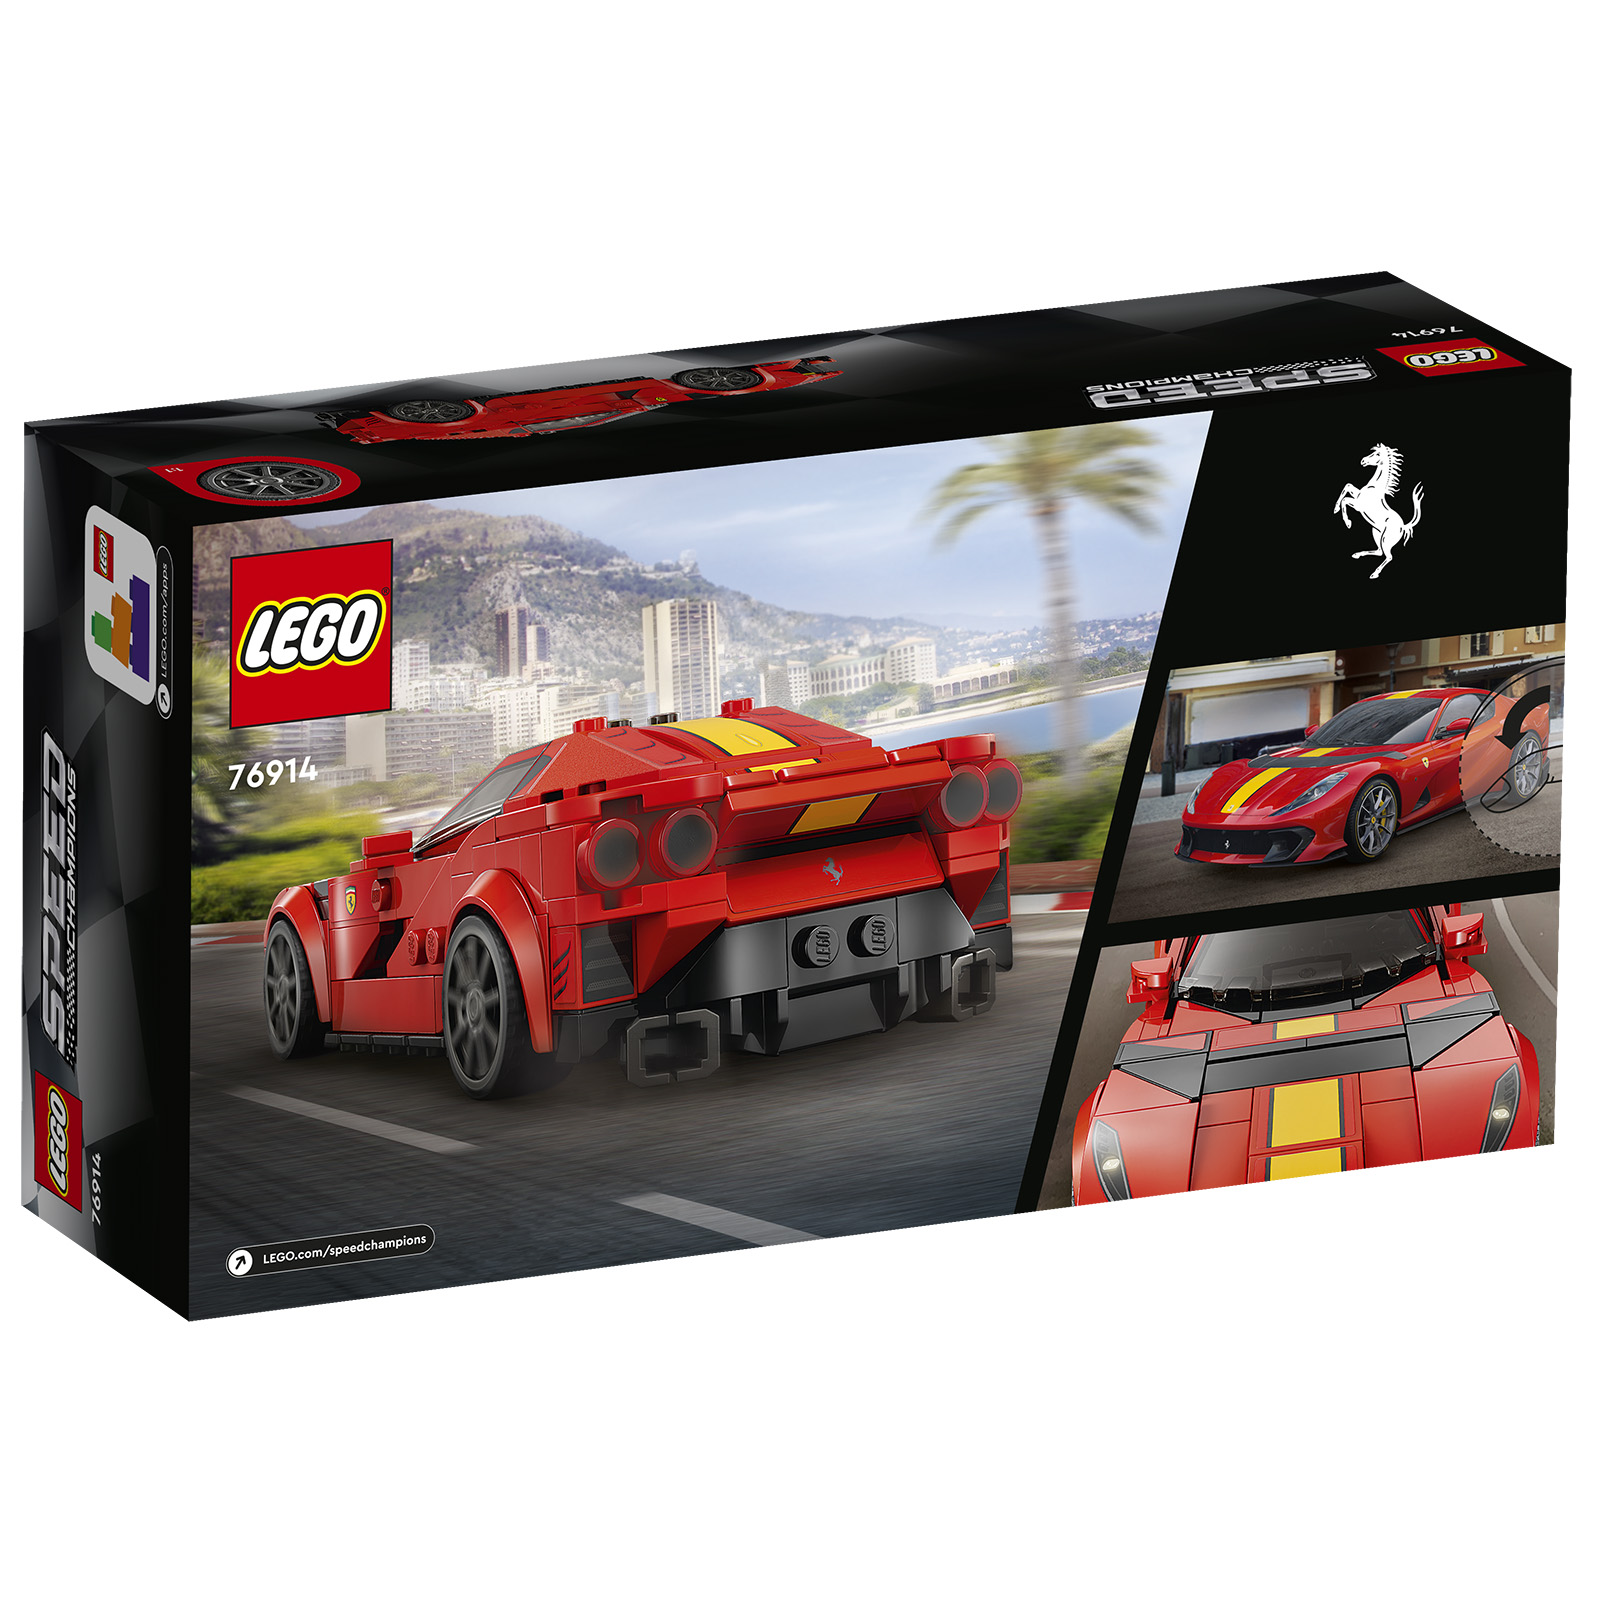 2022 LEGO Speed Champions Sets Announced - Speed Champions